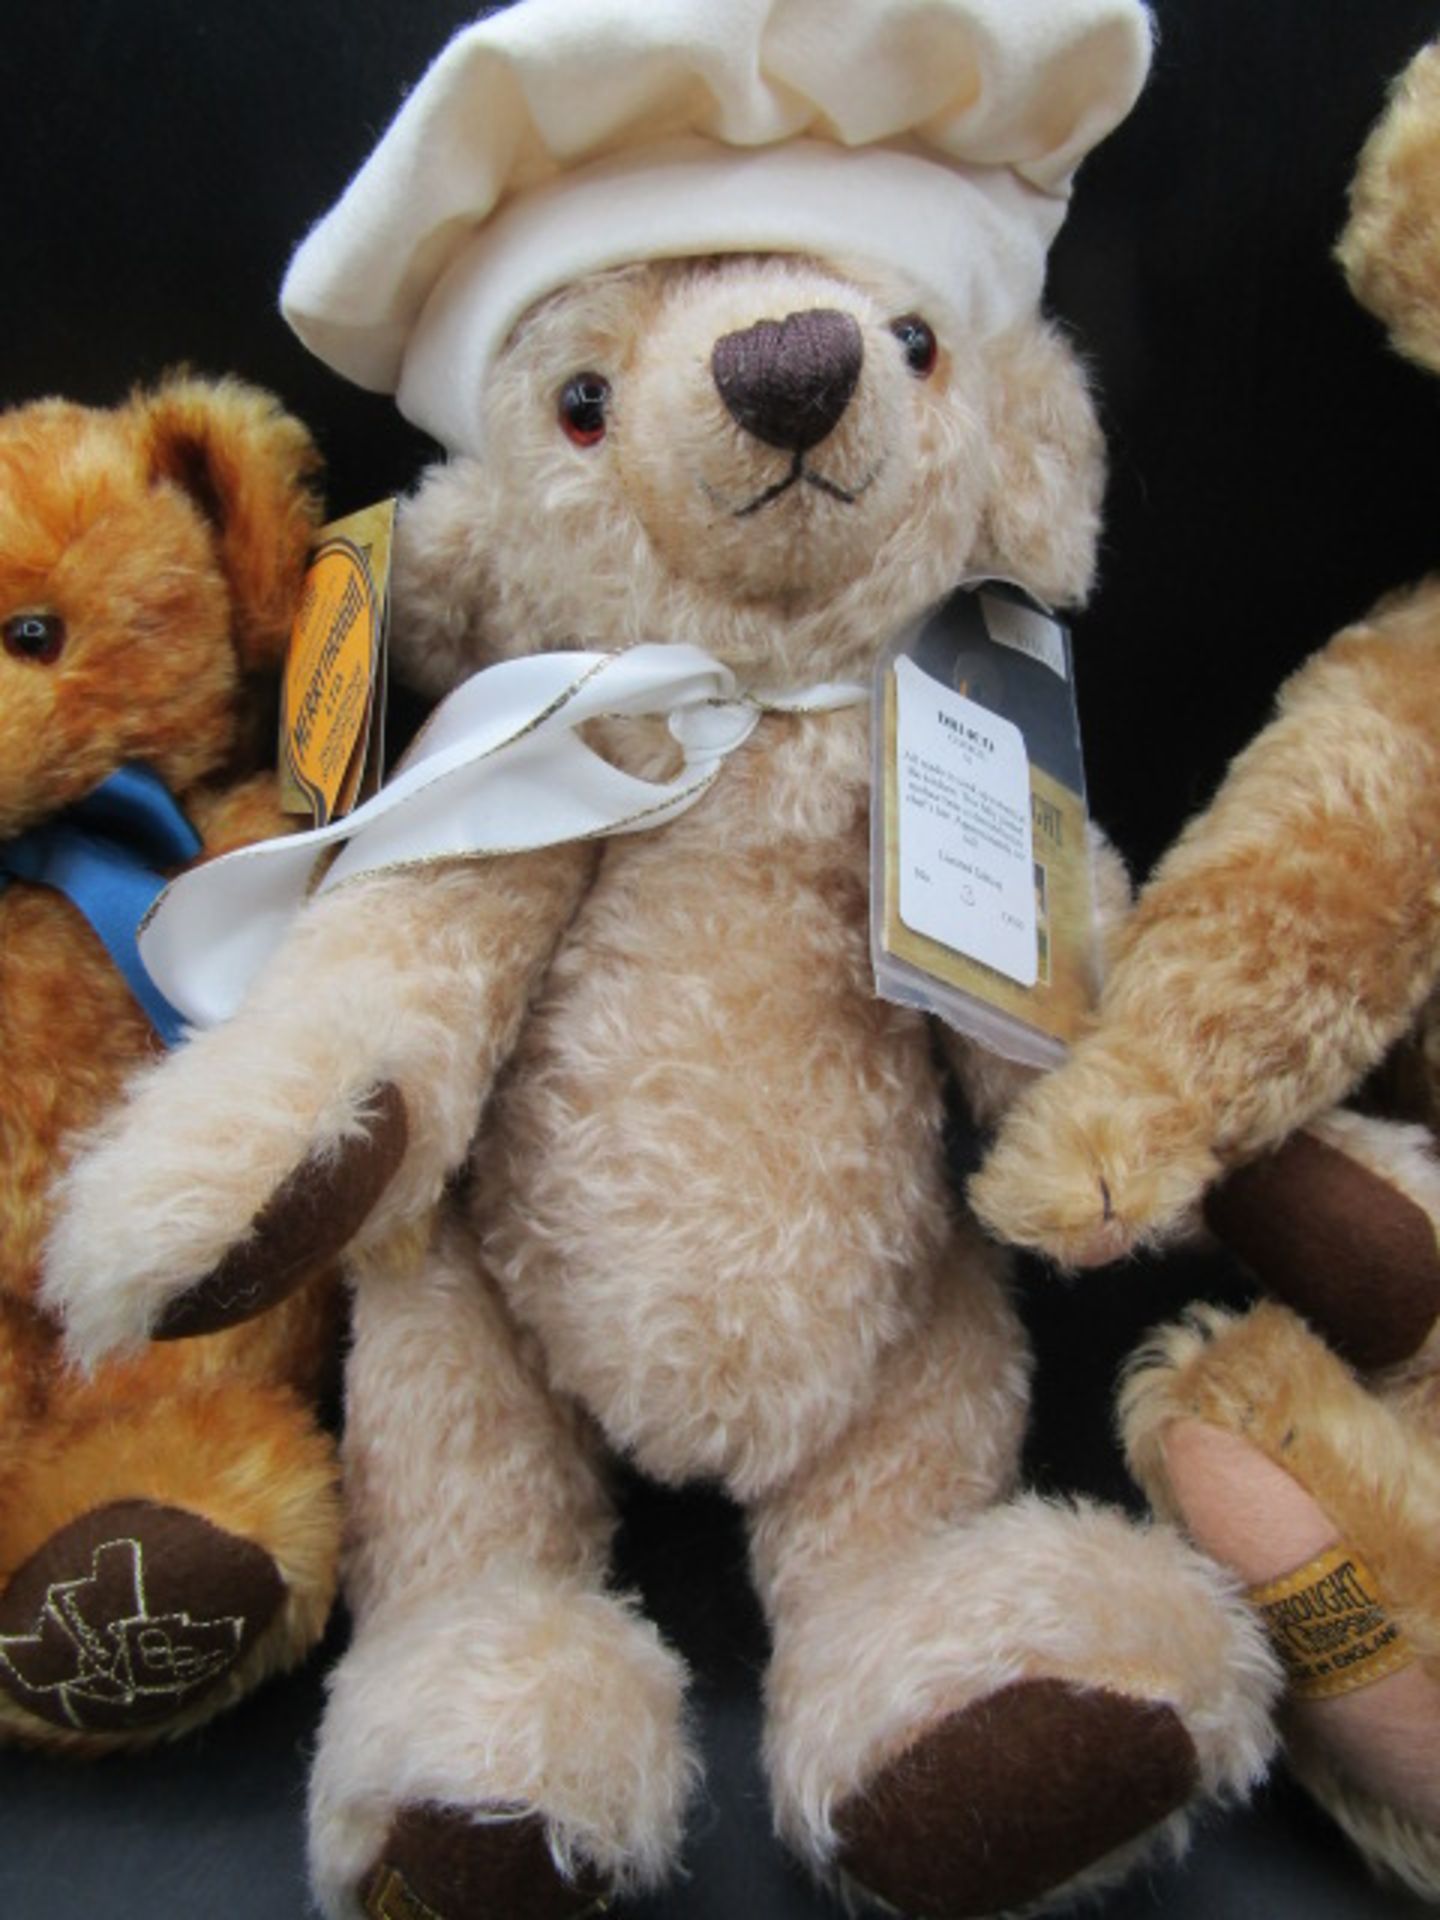 Teddy Bear Orphanage bear and 3 Merrythought bears - Image 3 of 9